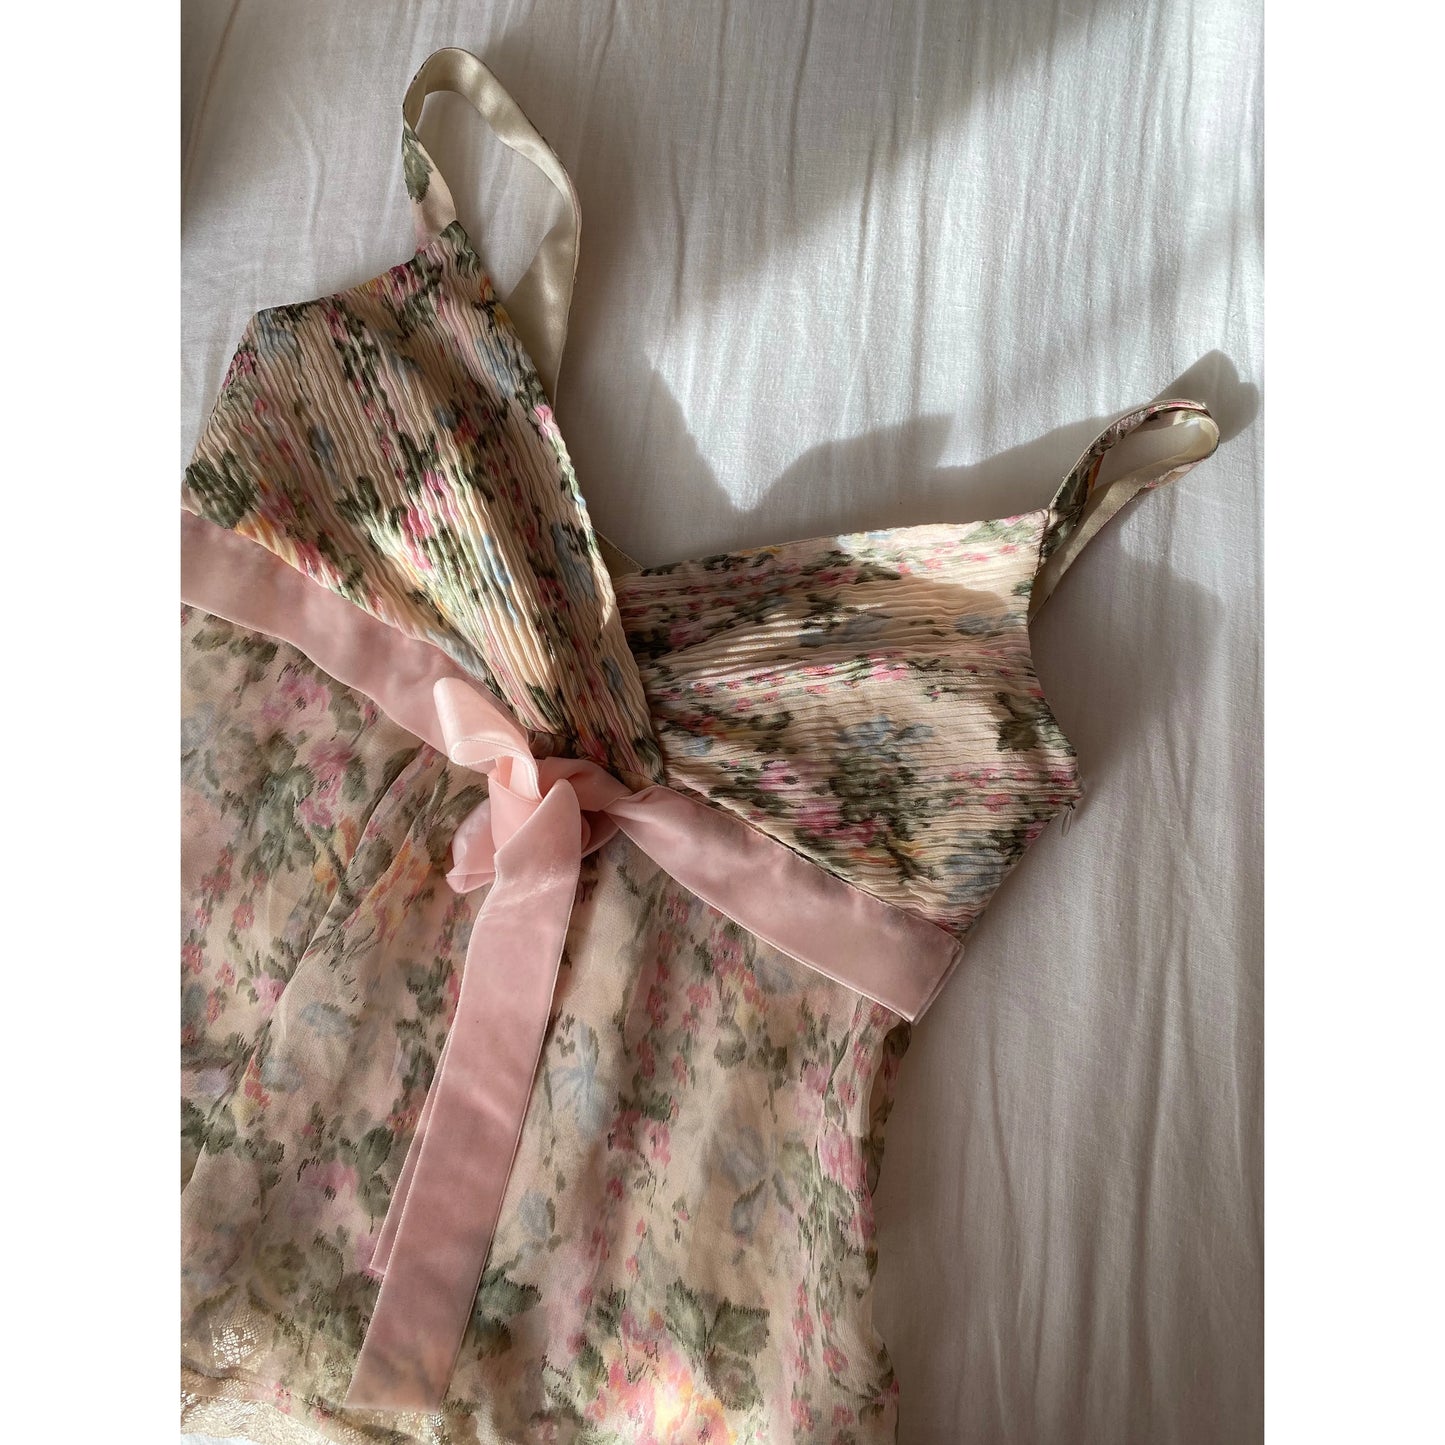 Red Valentino Floral Top with Tag (M)